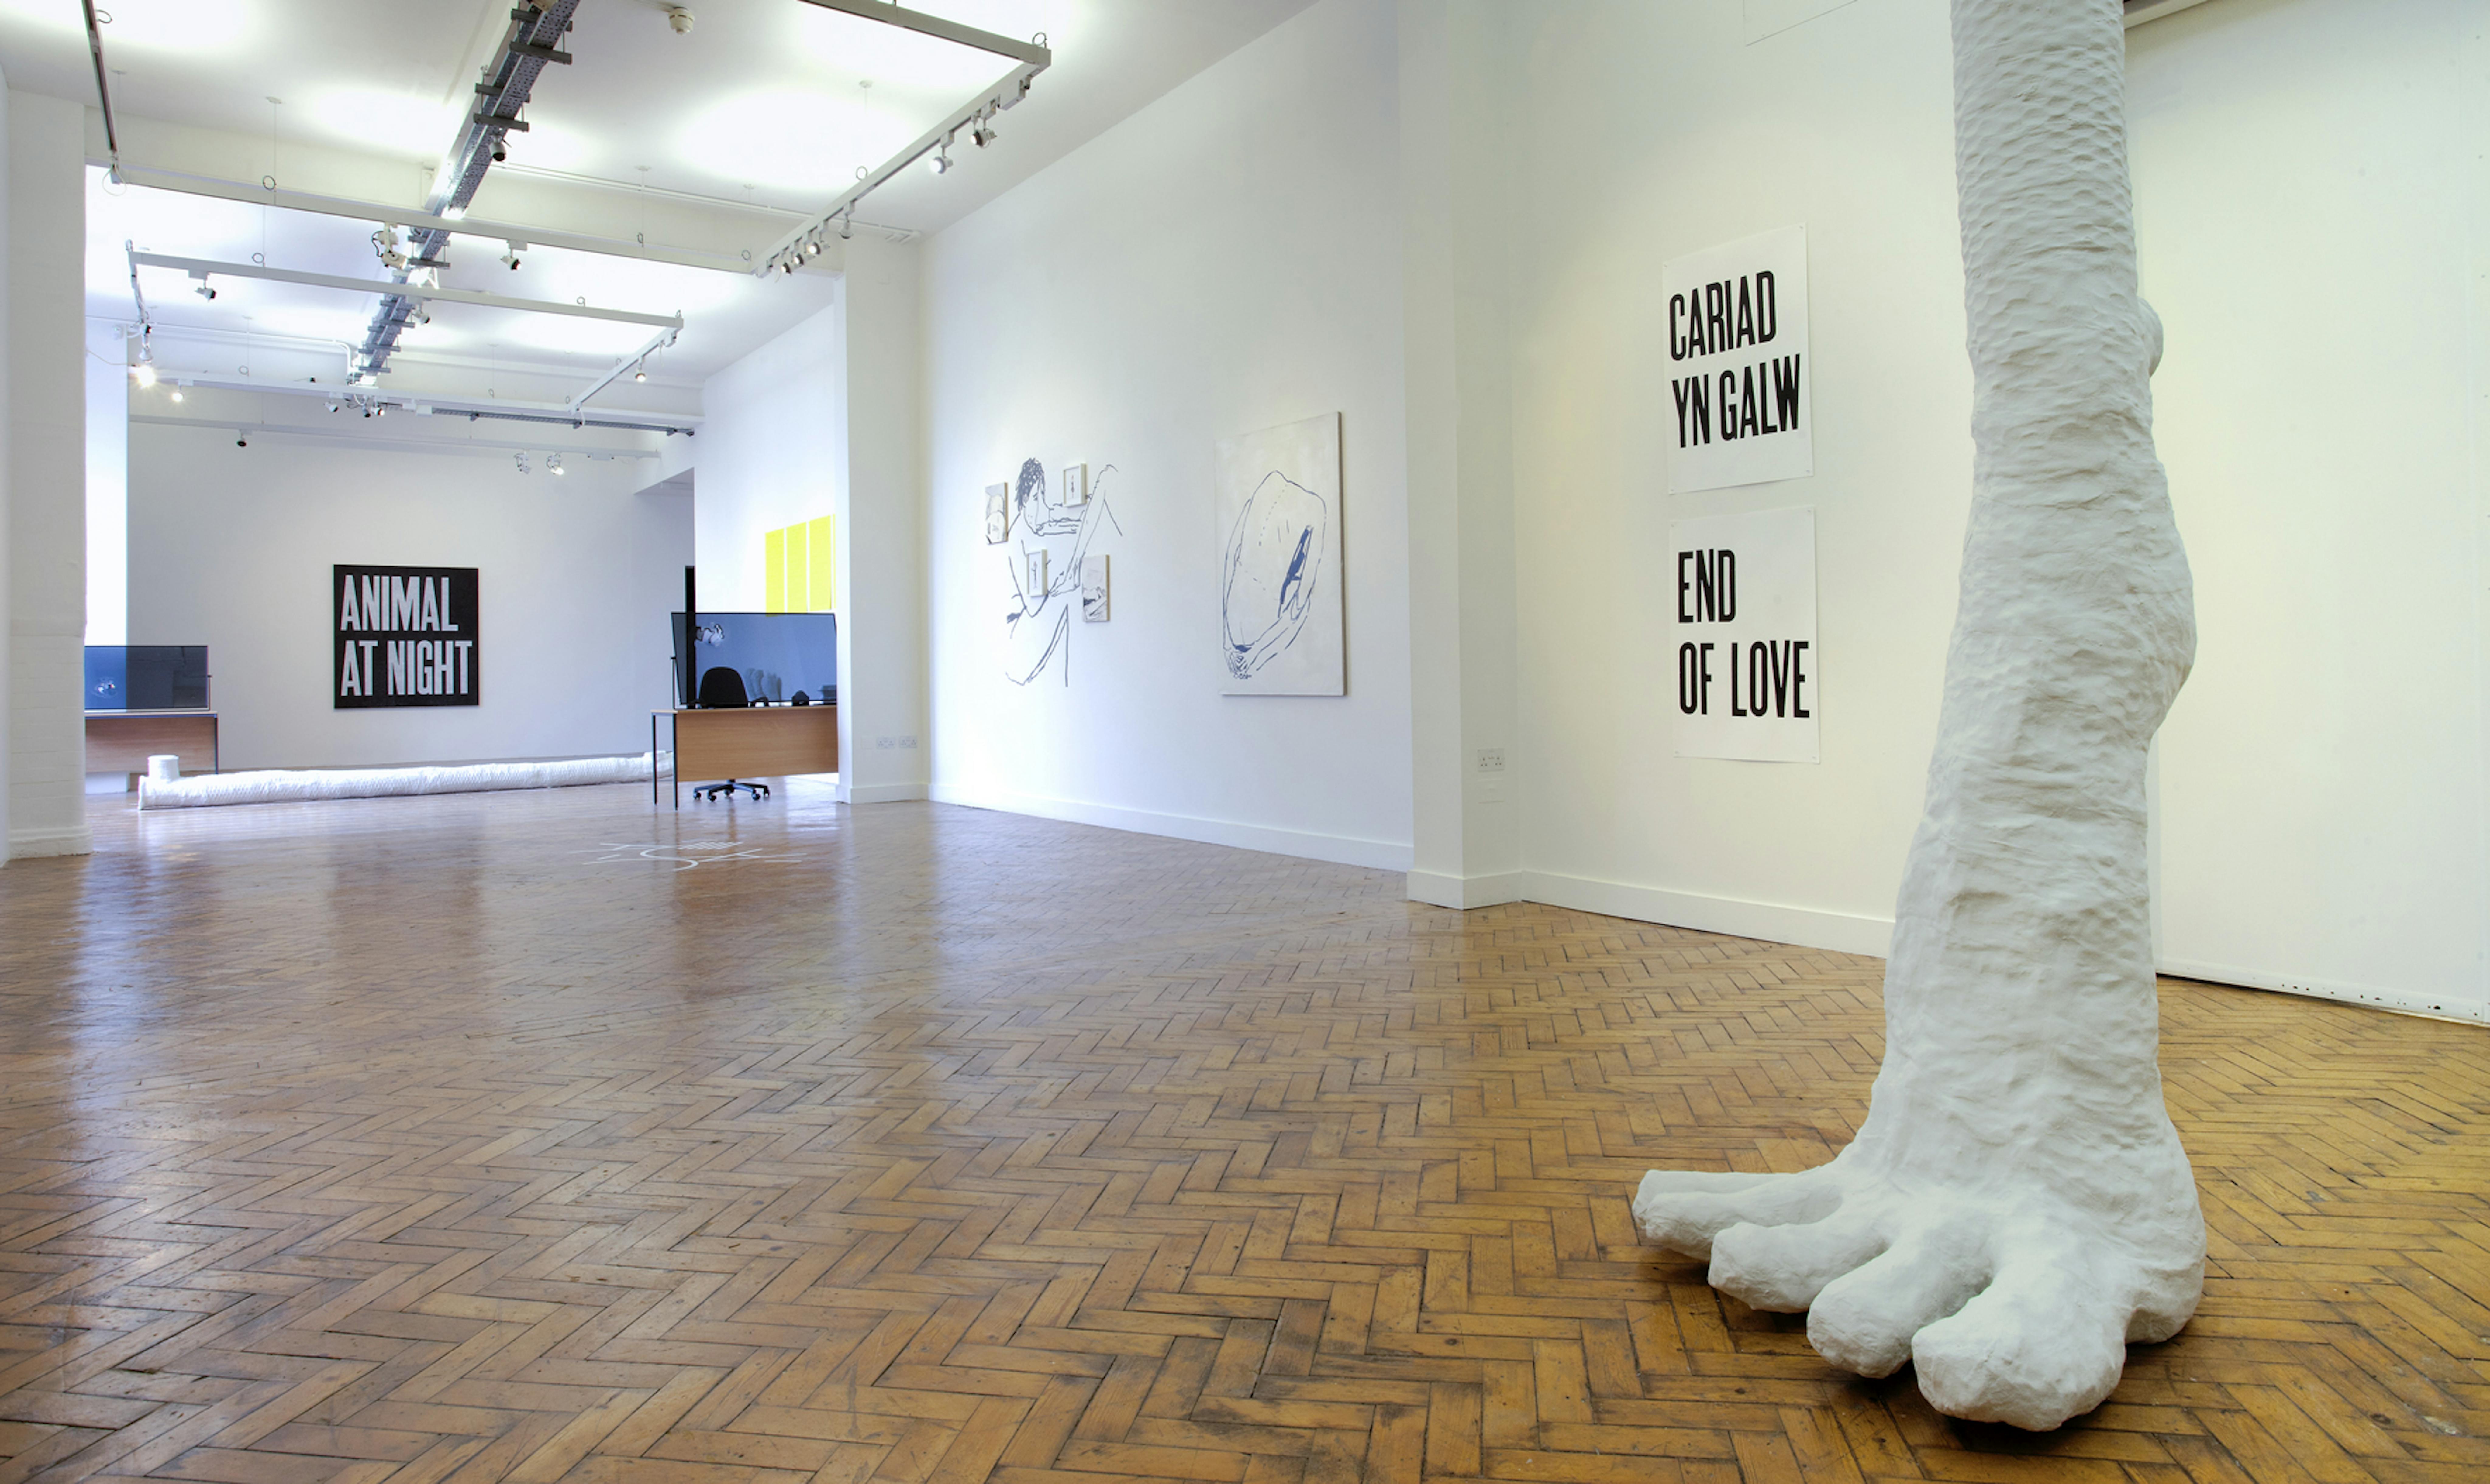 A large white foot appears from the ceiling of the gallery. It frames a long deep photograph depicting the installation of an exhibition with lots of paintings and drawings on the wall. 